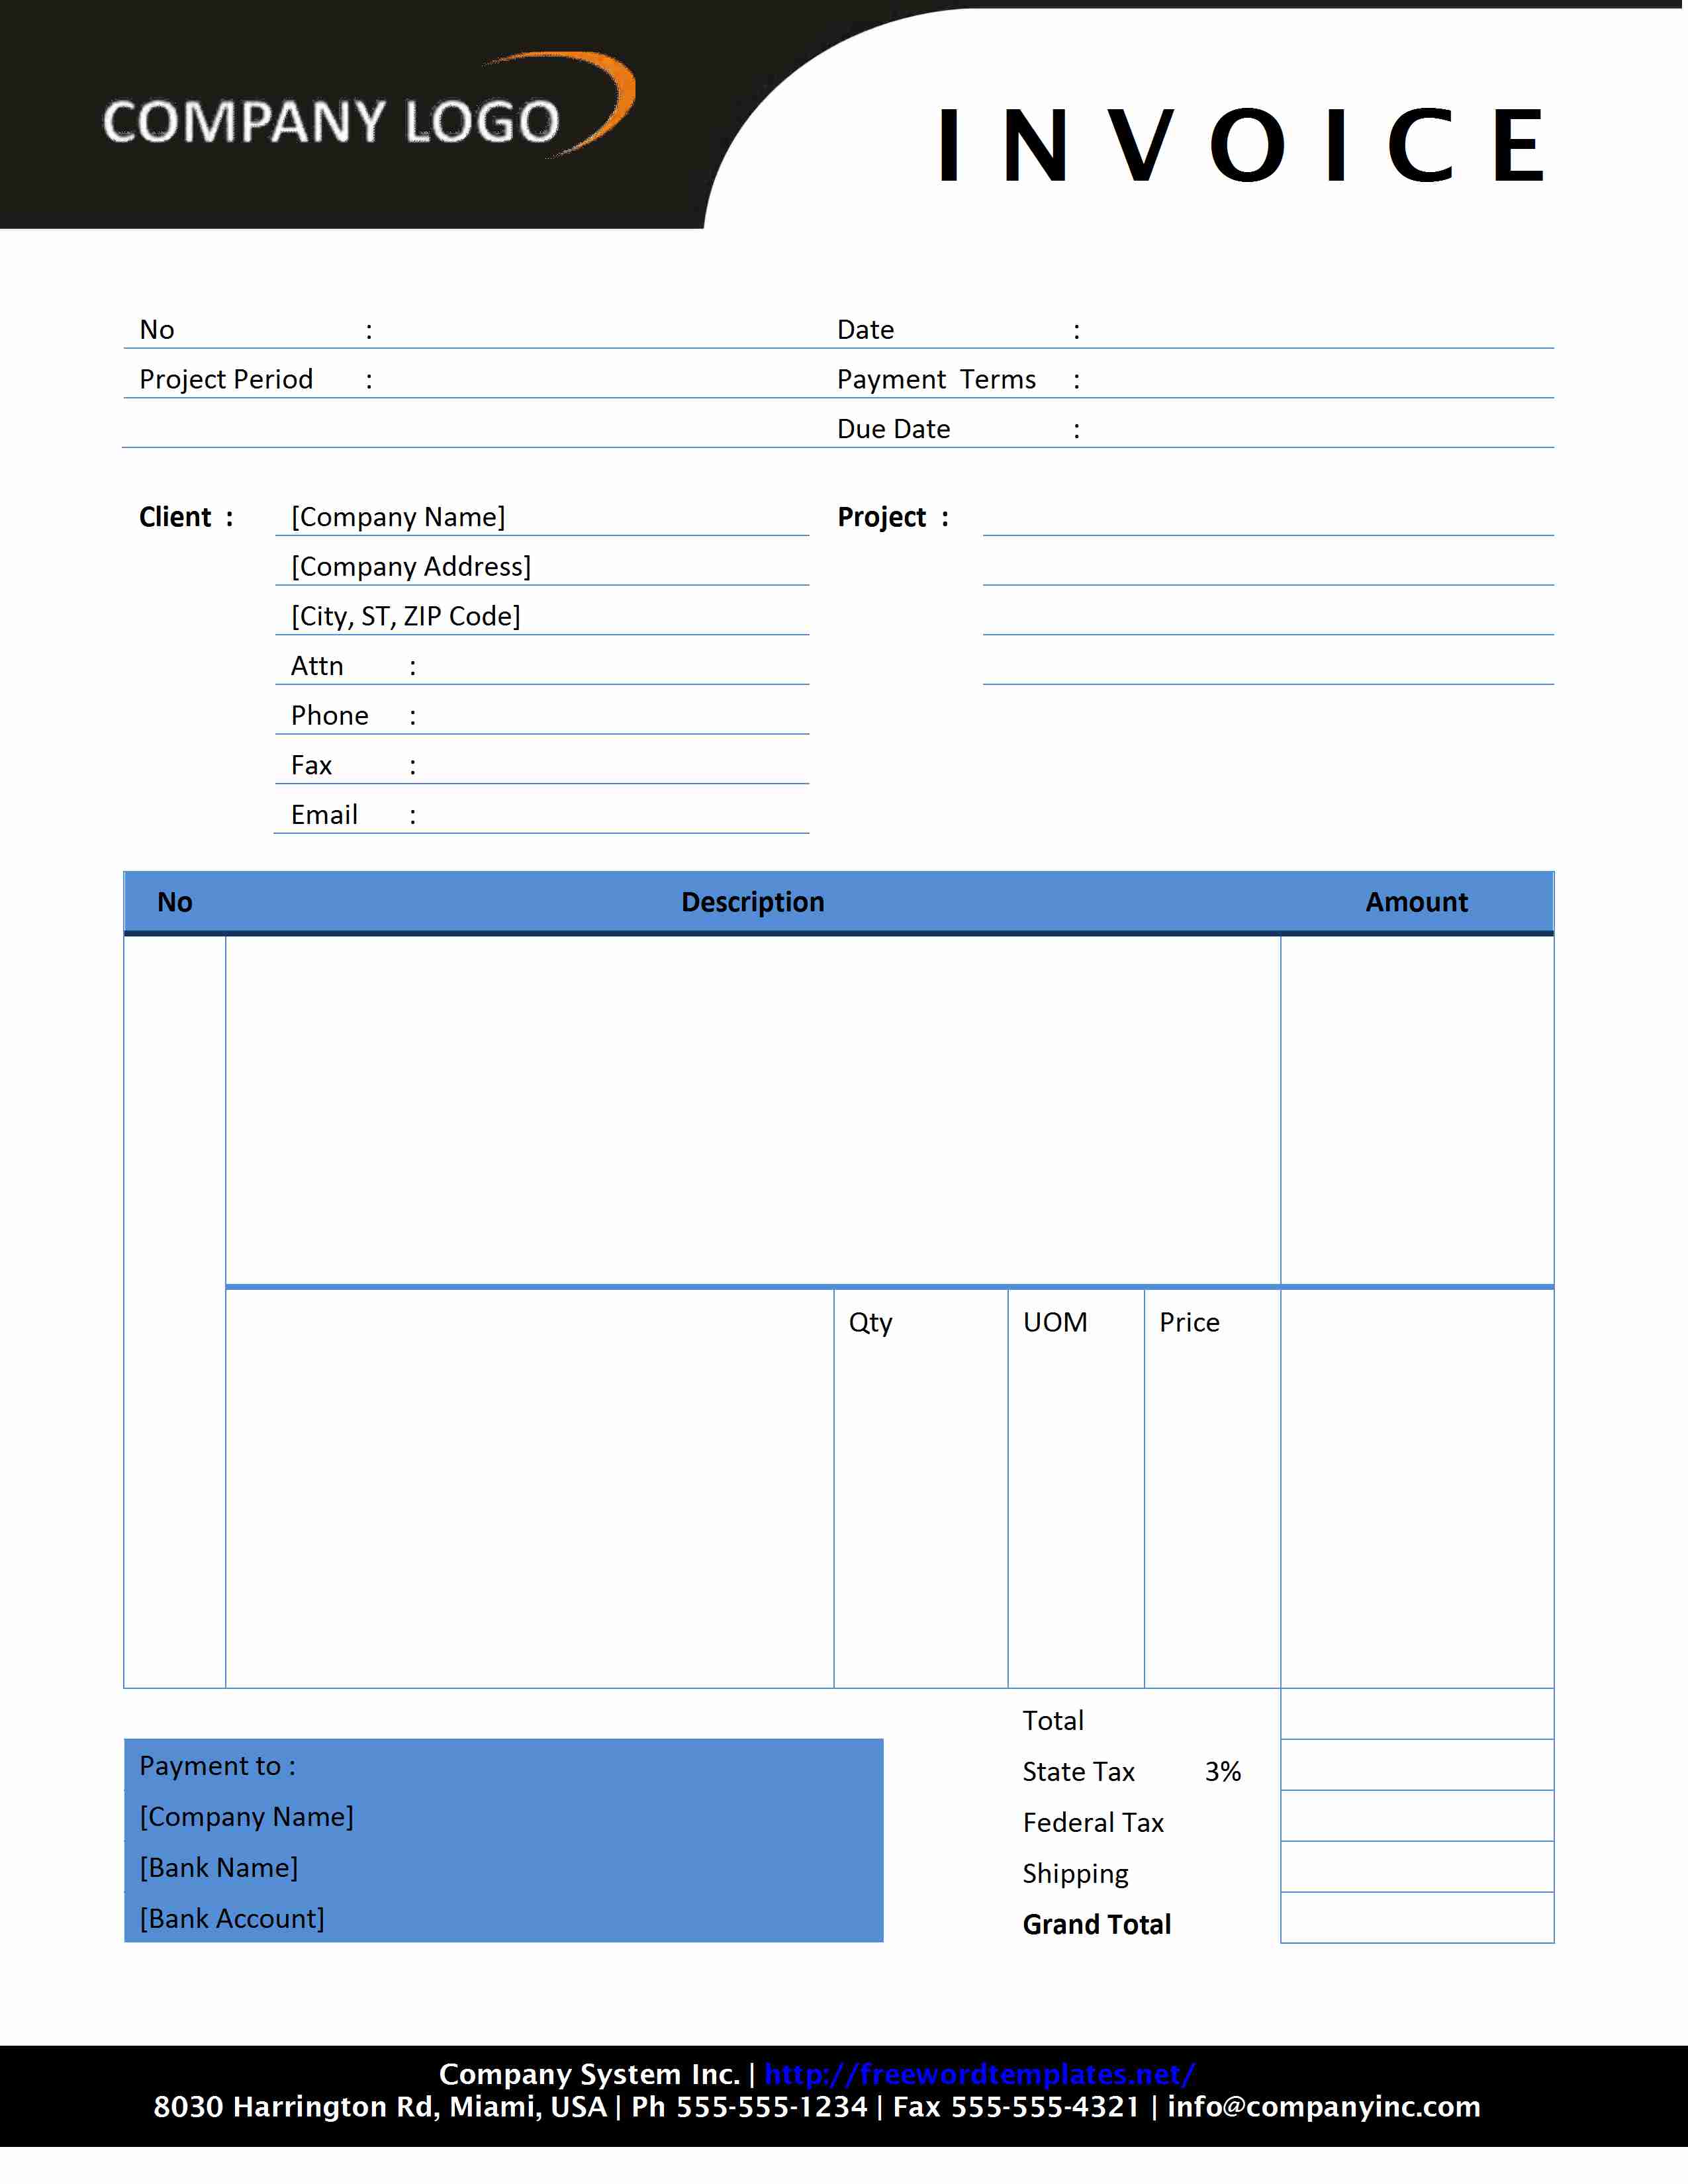 Invoice Template On Word For Mac Dhanhatban.info